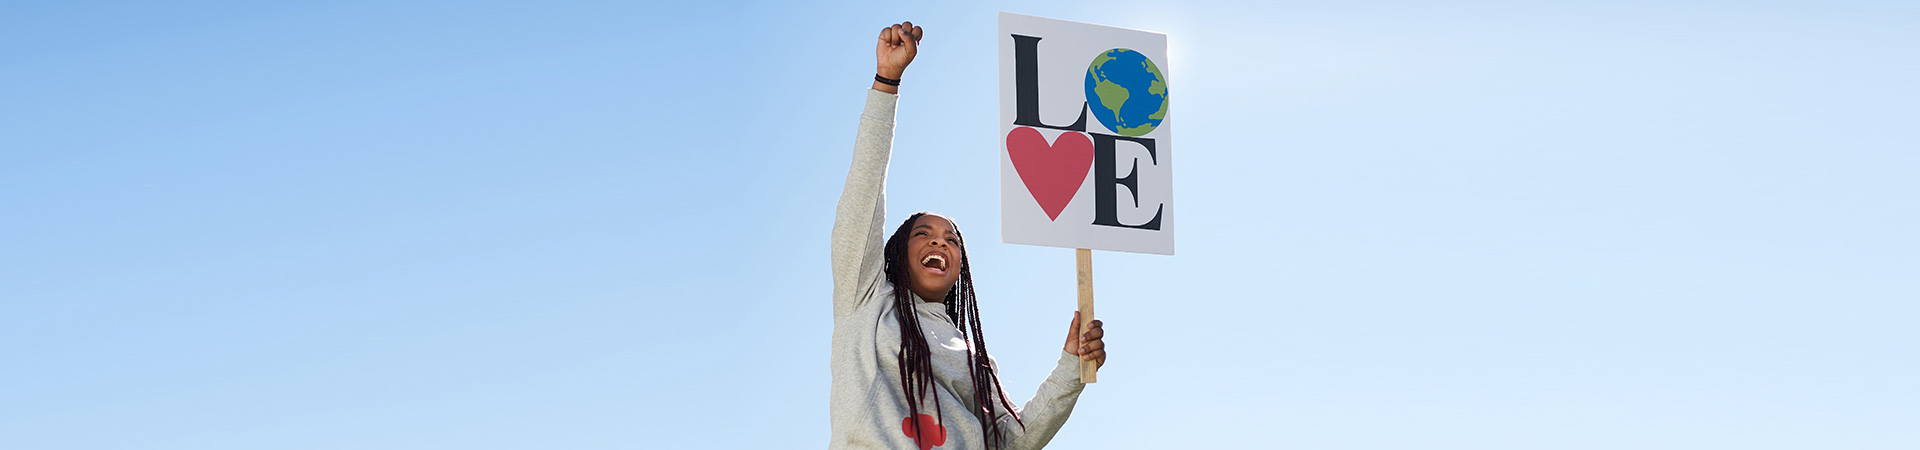  girl holding up a protest sign that says "Love" with an image of the earth for the "o" and a heart for the "v" 